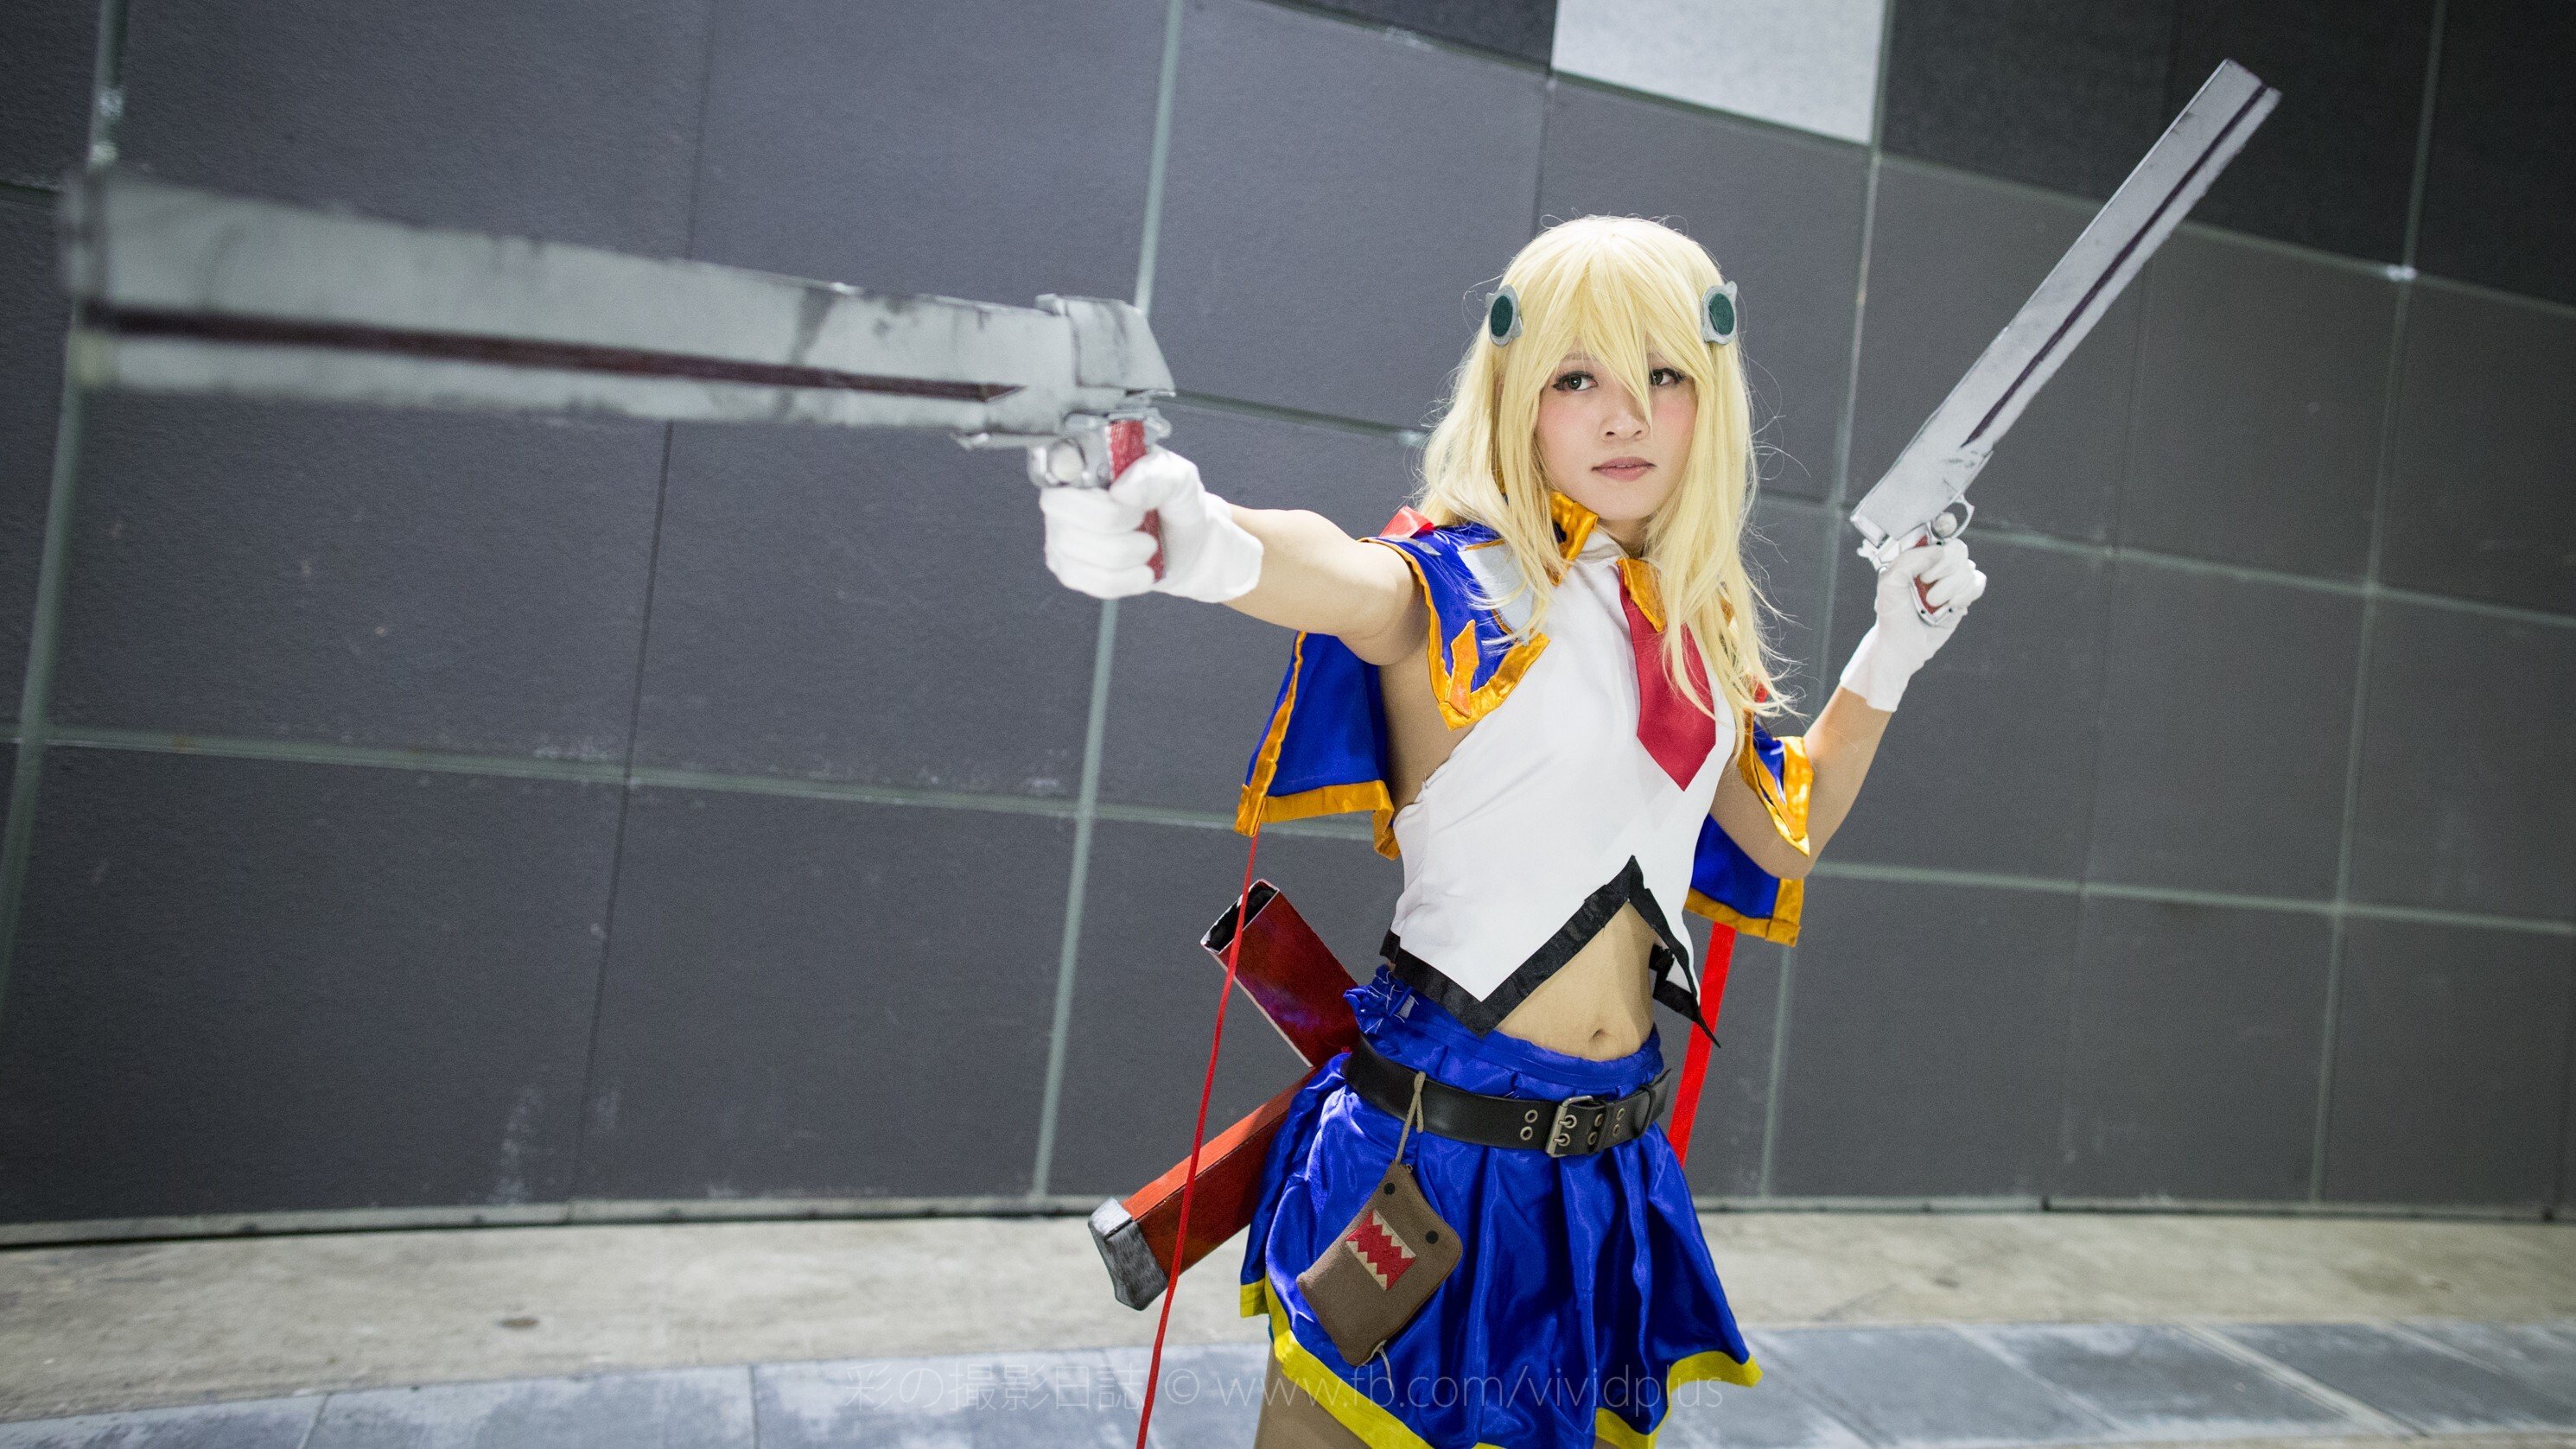 Cosplayers in drag: the Singaporeans who cross-dress as anime princesses to  relieve boredom of their everyday lives | South China Morning Post